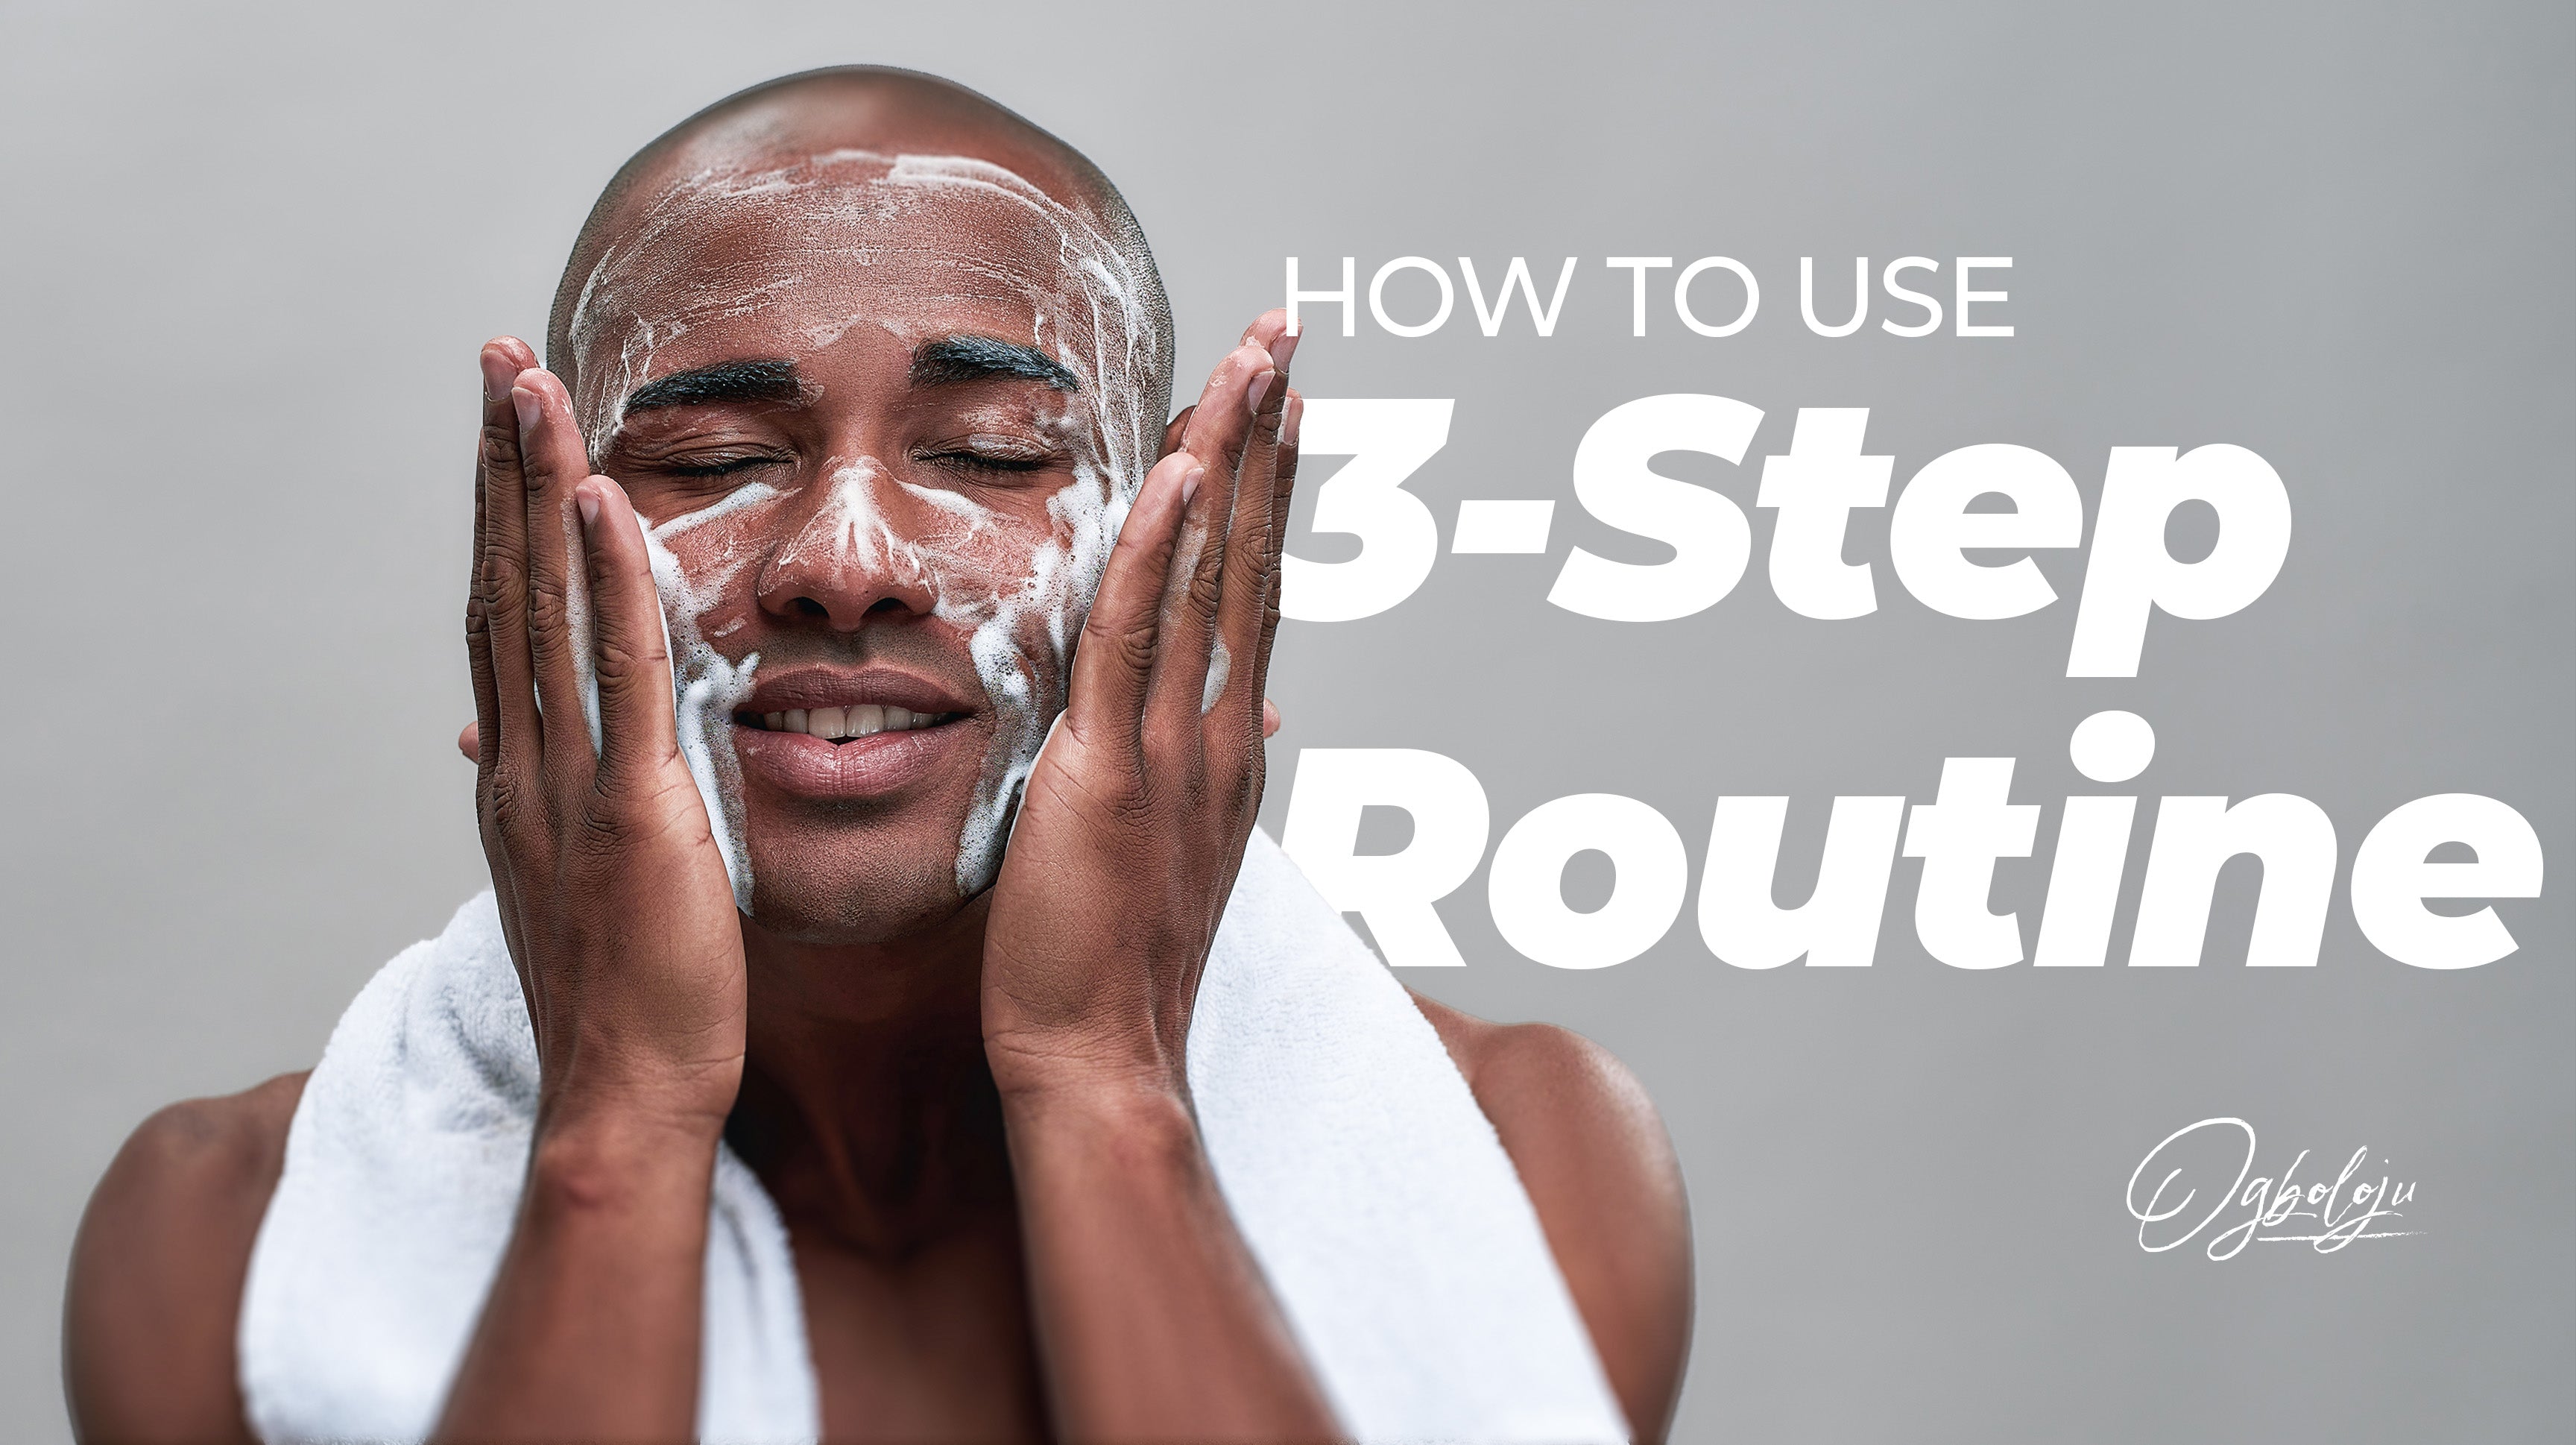 Load video: How To Use 3-Step Routine